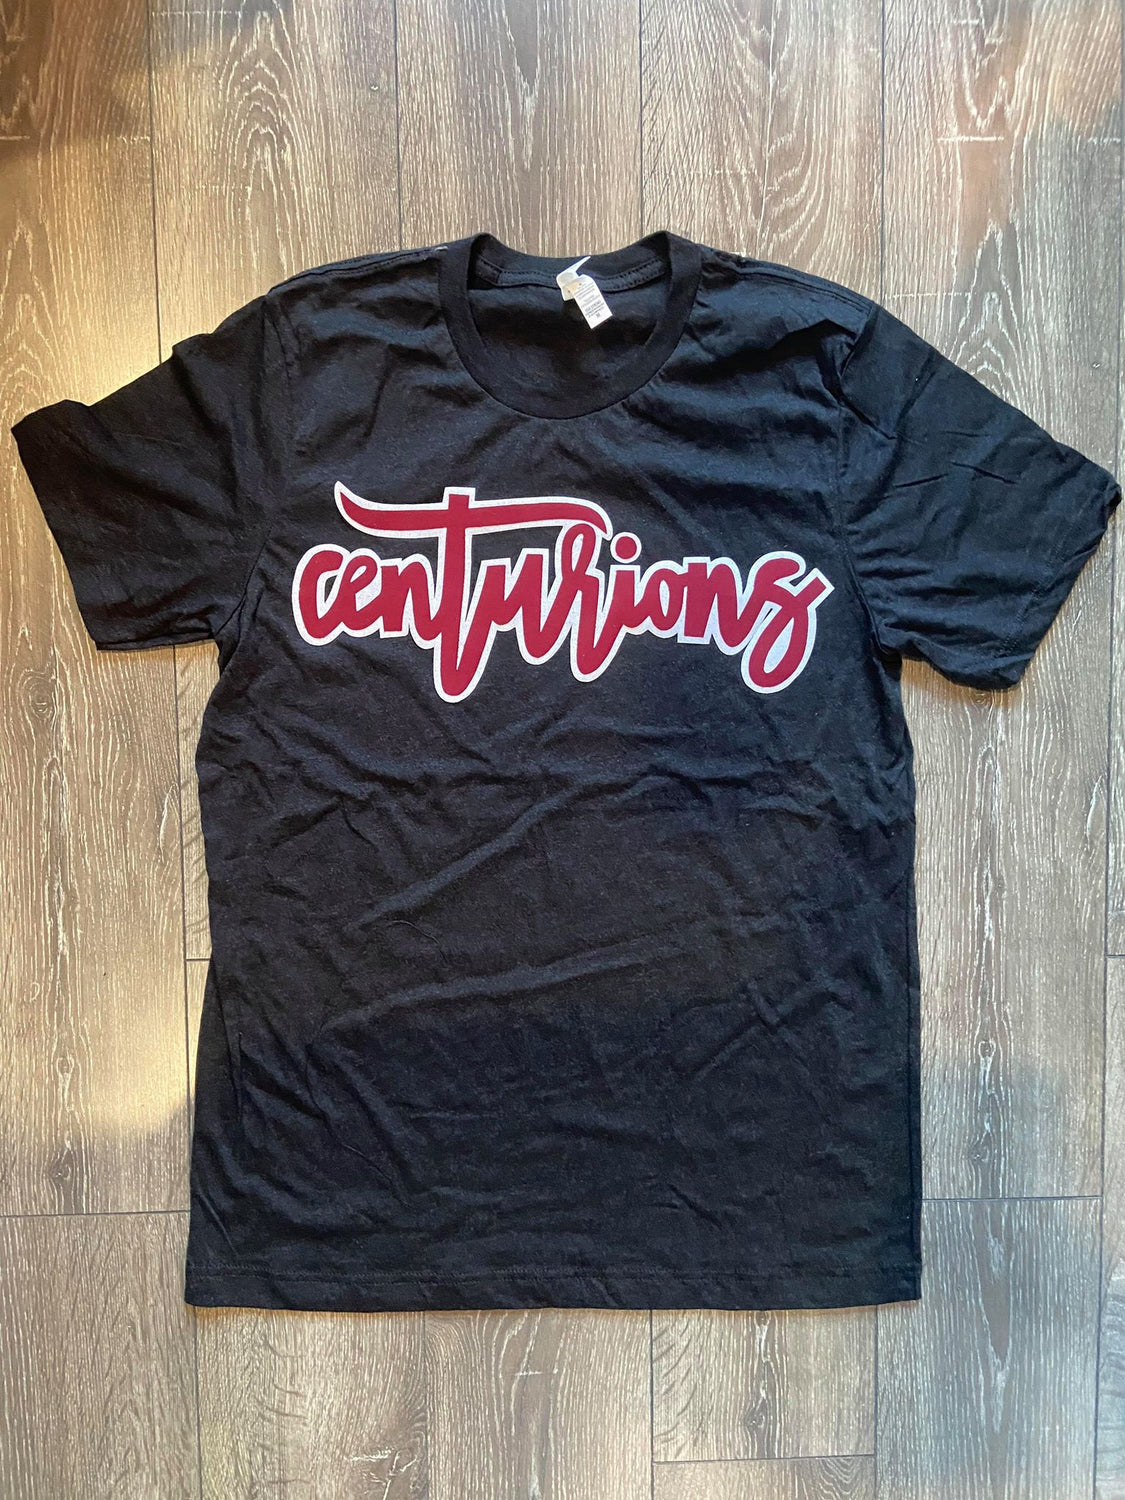 CENTURIONS - YOUTH/ ADULT TEE